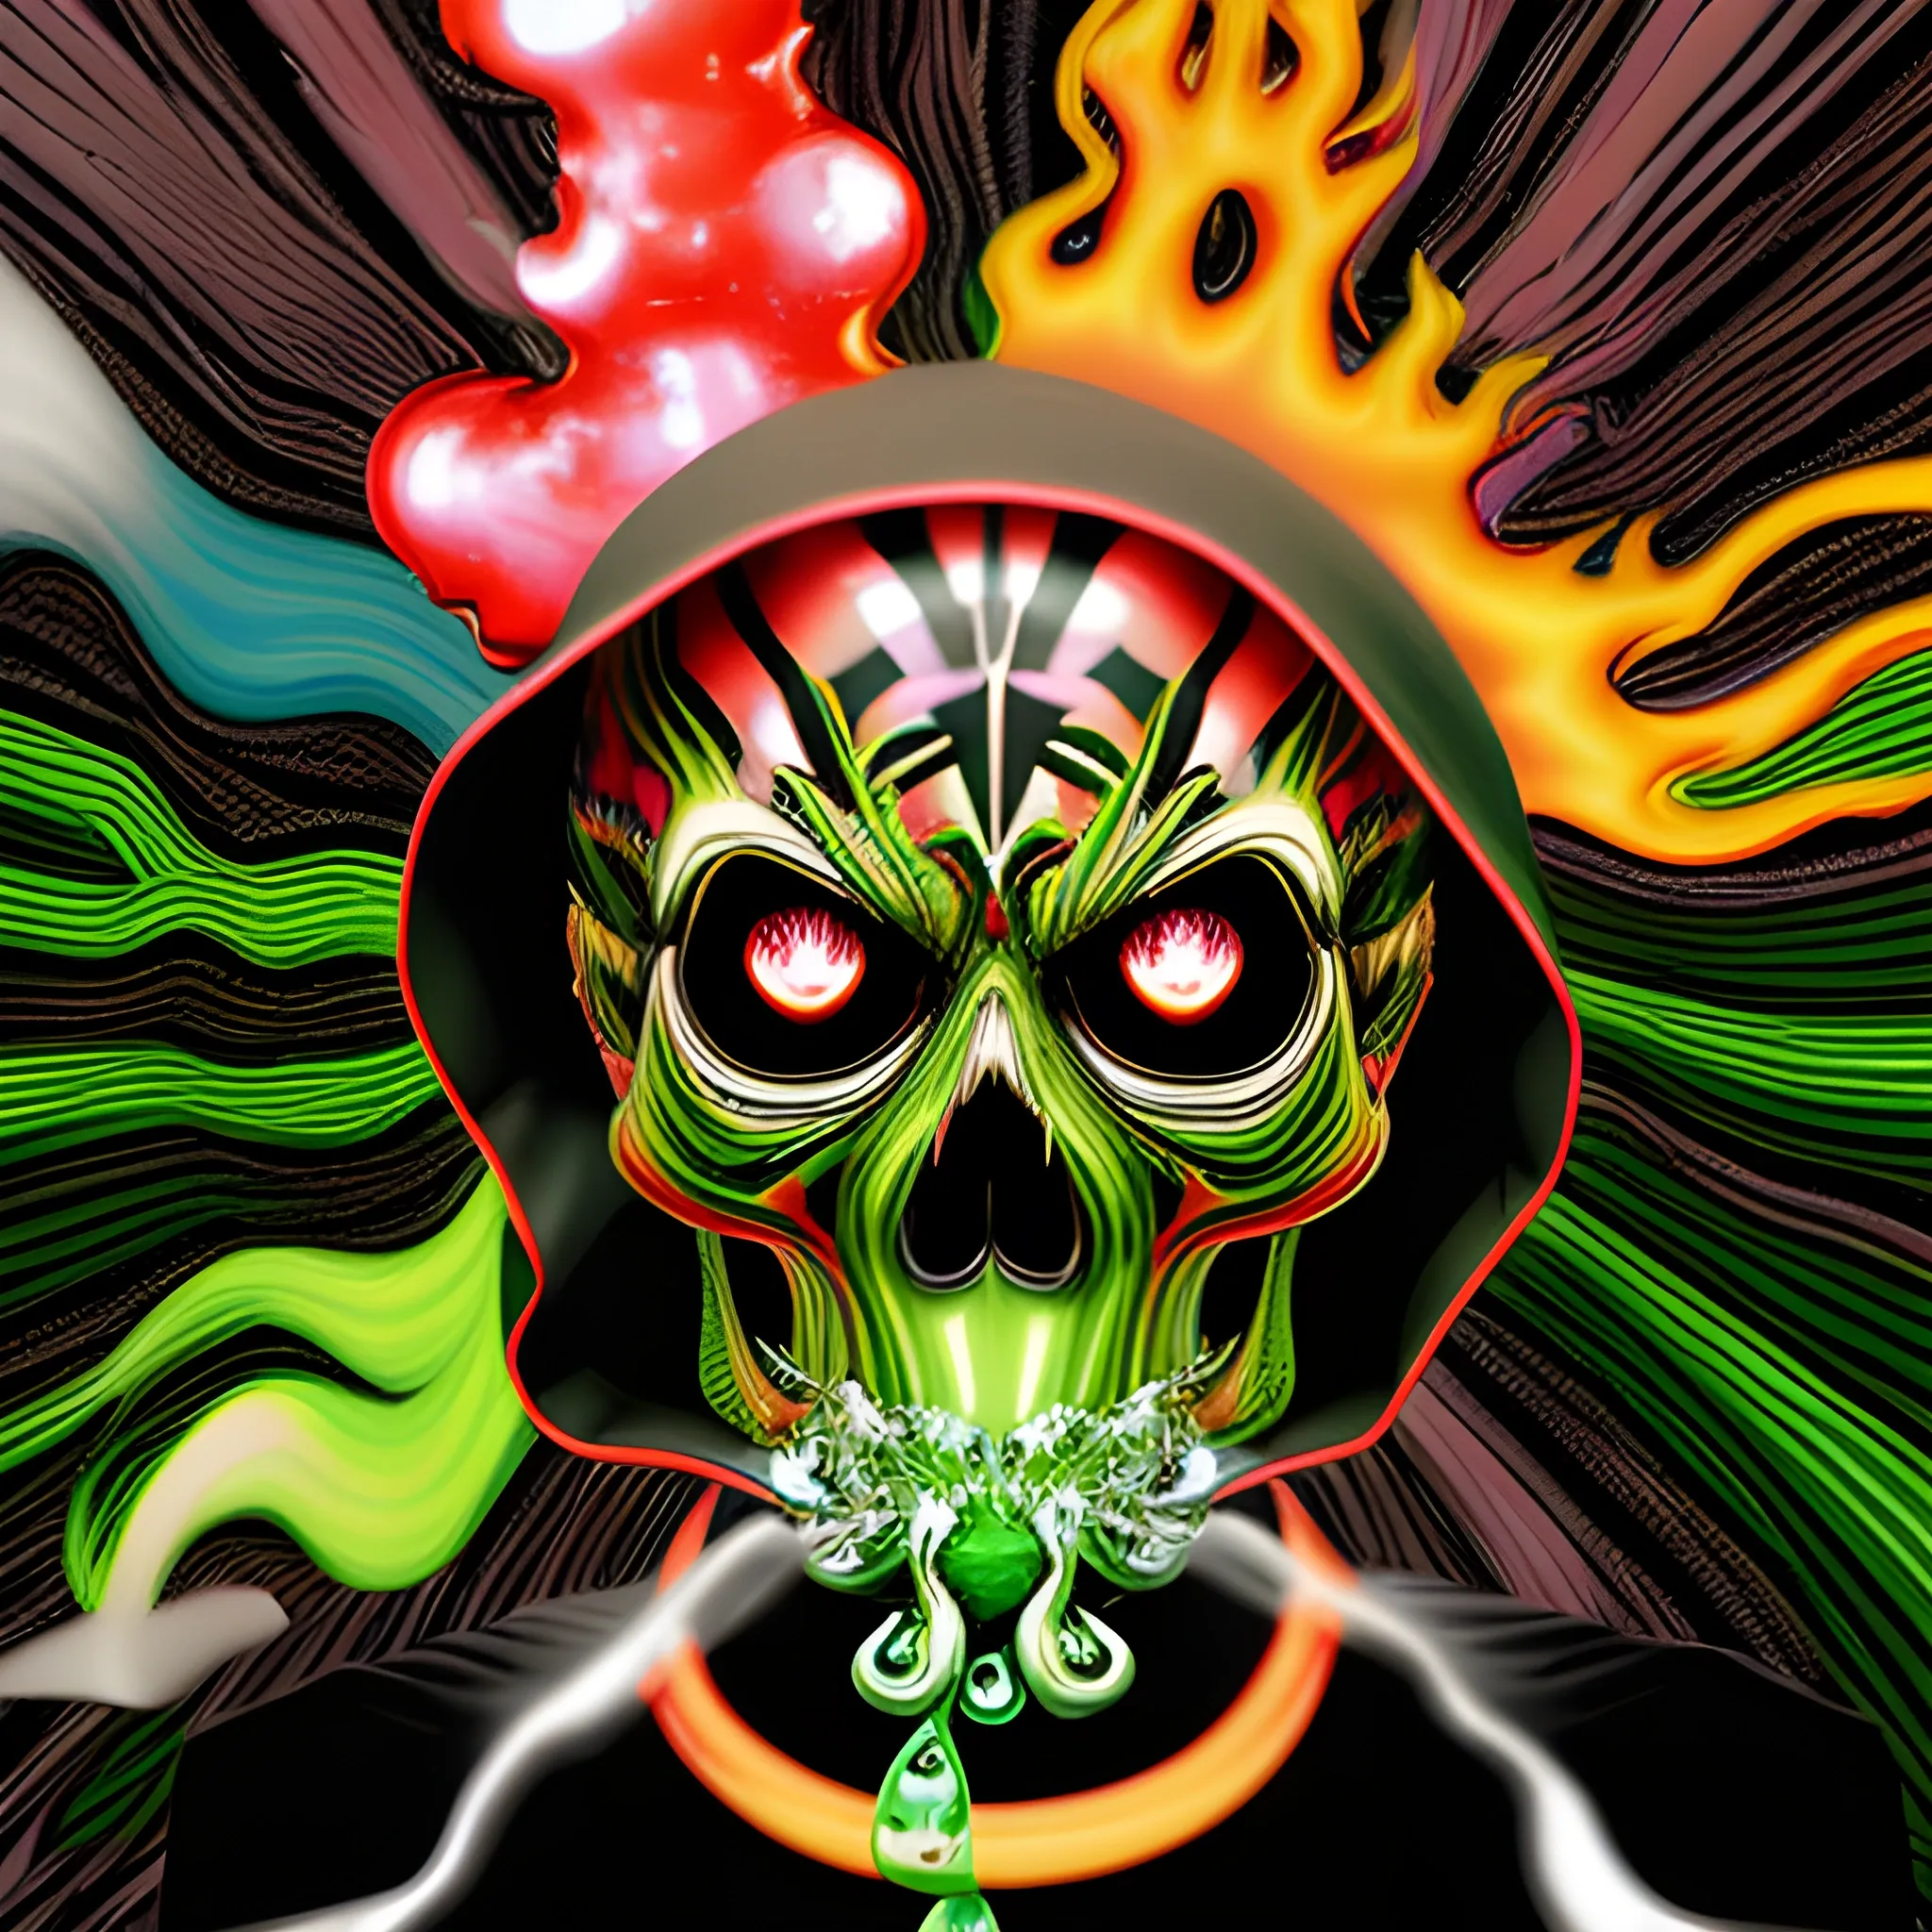 rfktrstyle A 4k death skull controlling and manipulating out of control fire and water, multicolor fire, freshy, surrounded by chibiStyle hooded-sugar-skulls, (yellow&red colored fire)(black&green colored water:1.5), tangled, elemental splash, detailed glowing demon eyes, Dynamic, vivid, creative, soft shadow, perfect anatomy, perfect hands, hyperdetailed artwork,tshirt design,  perfectly centred, neo-expressionist oil paint, centred, posing portrait by hajime sorayama